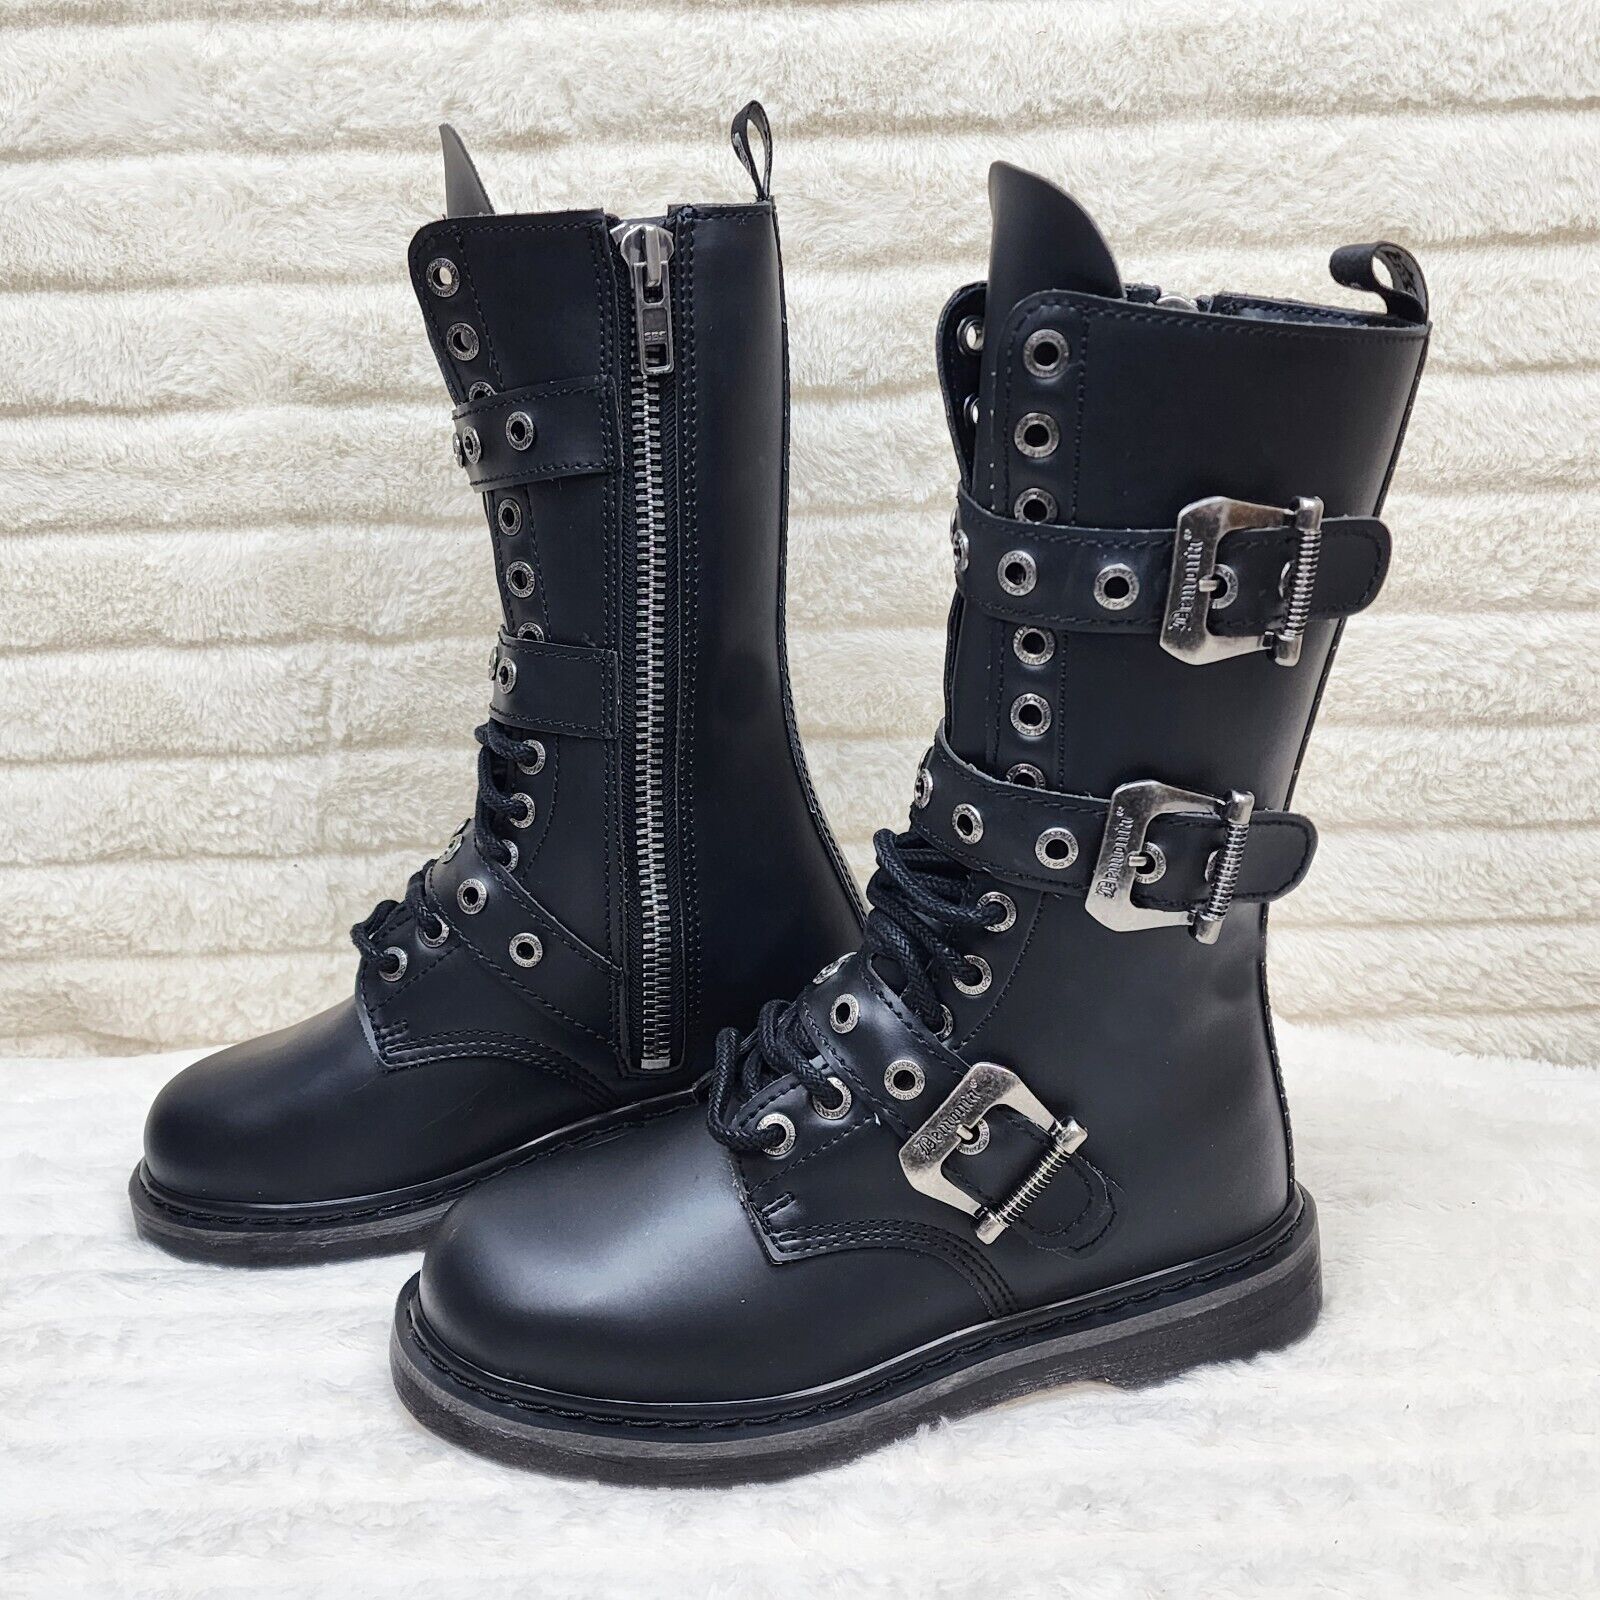 Brand Women's Hollow Ankle Boots Black Gothic Biker Boots Cosplay